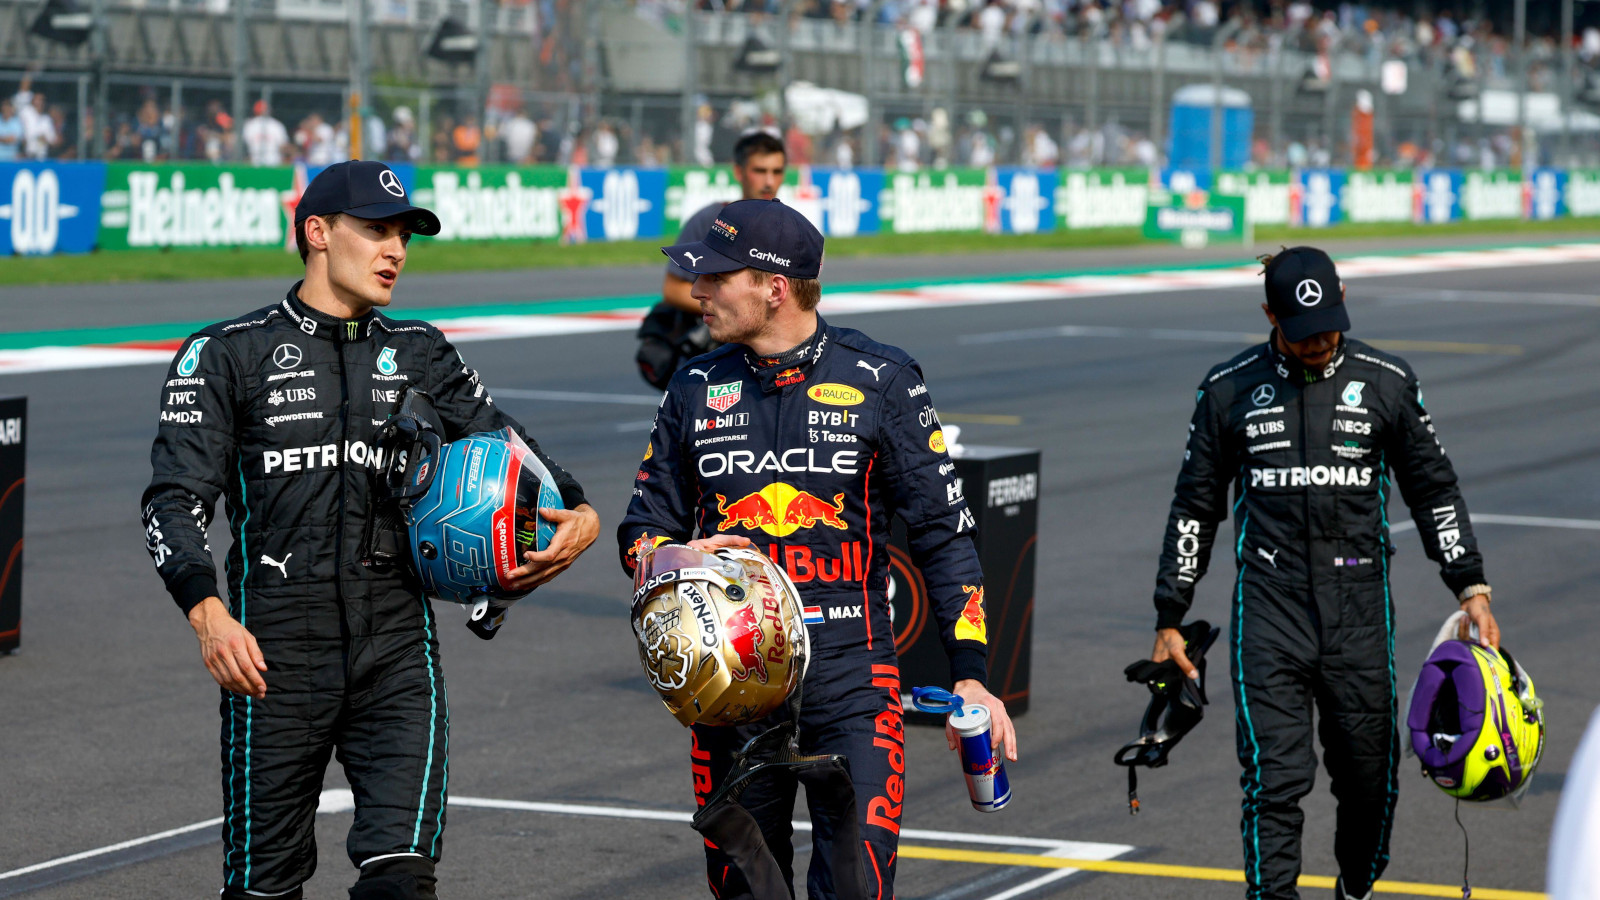 Max Verstappen speaking with George Russell, Lewis Hamilton in the background. Mexico October 2022